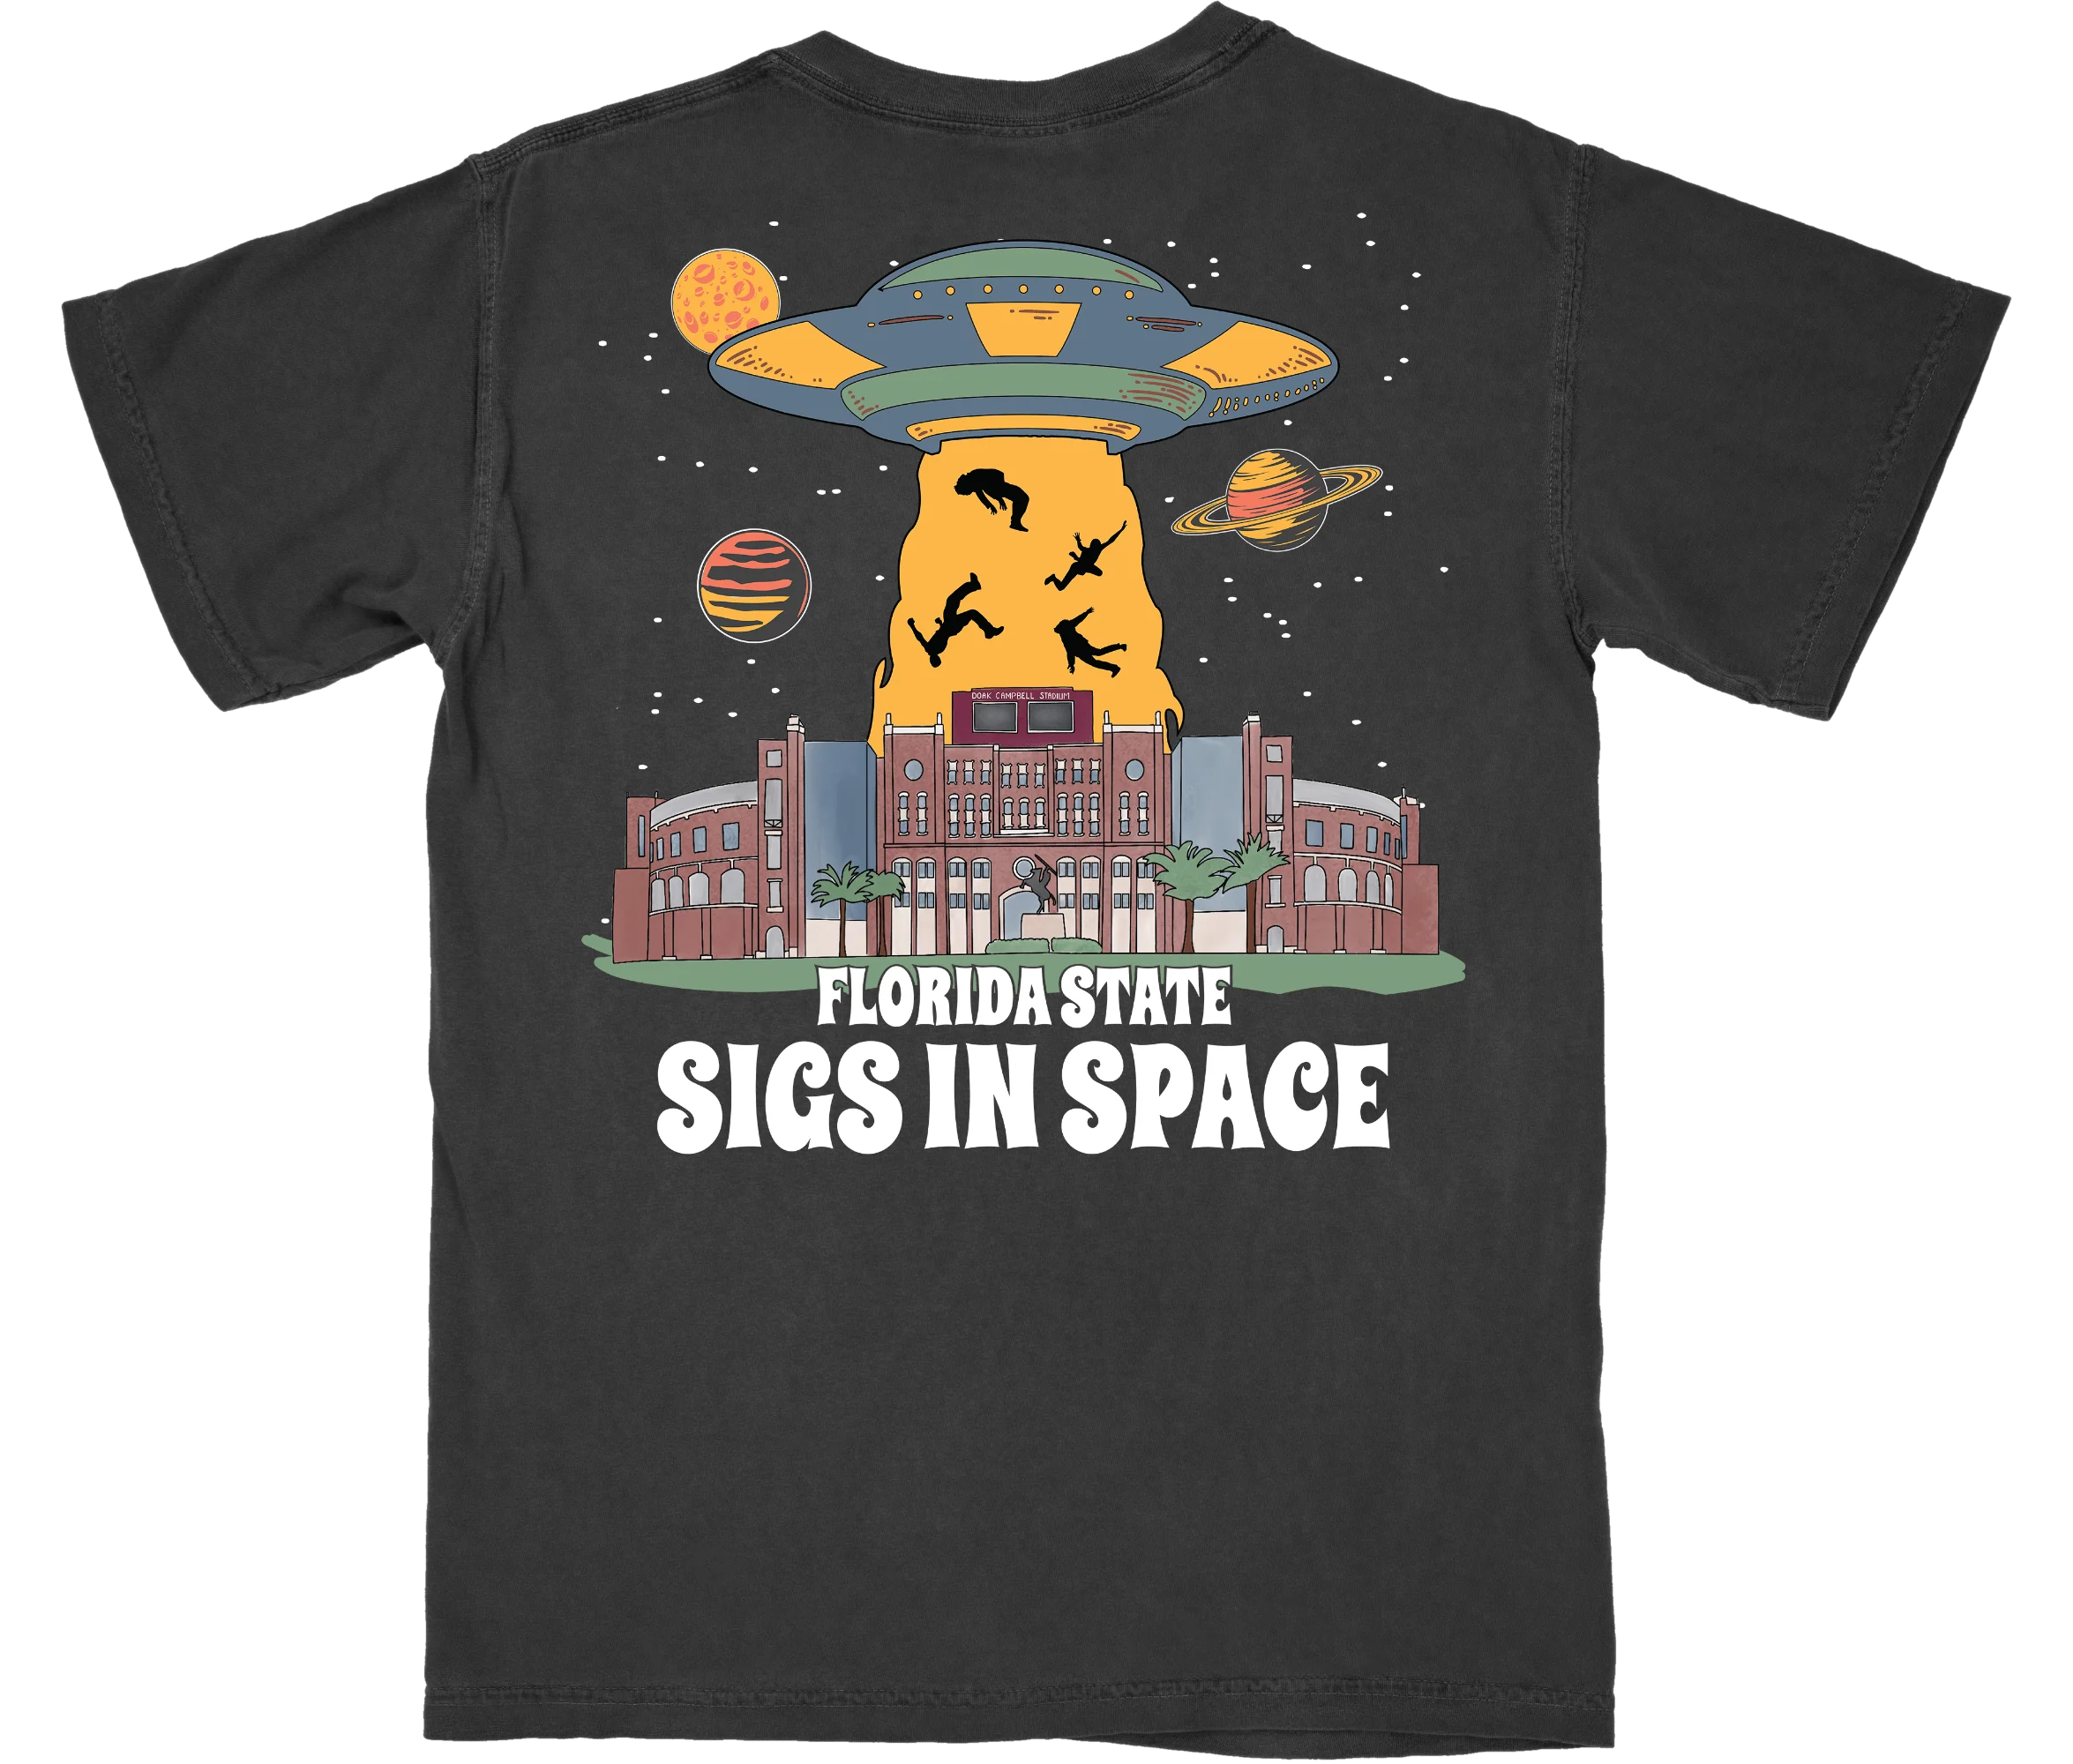 Sigs in Space Shirt